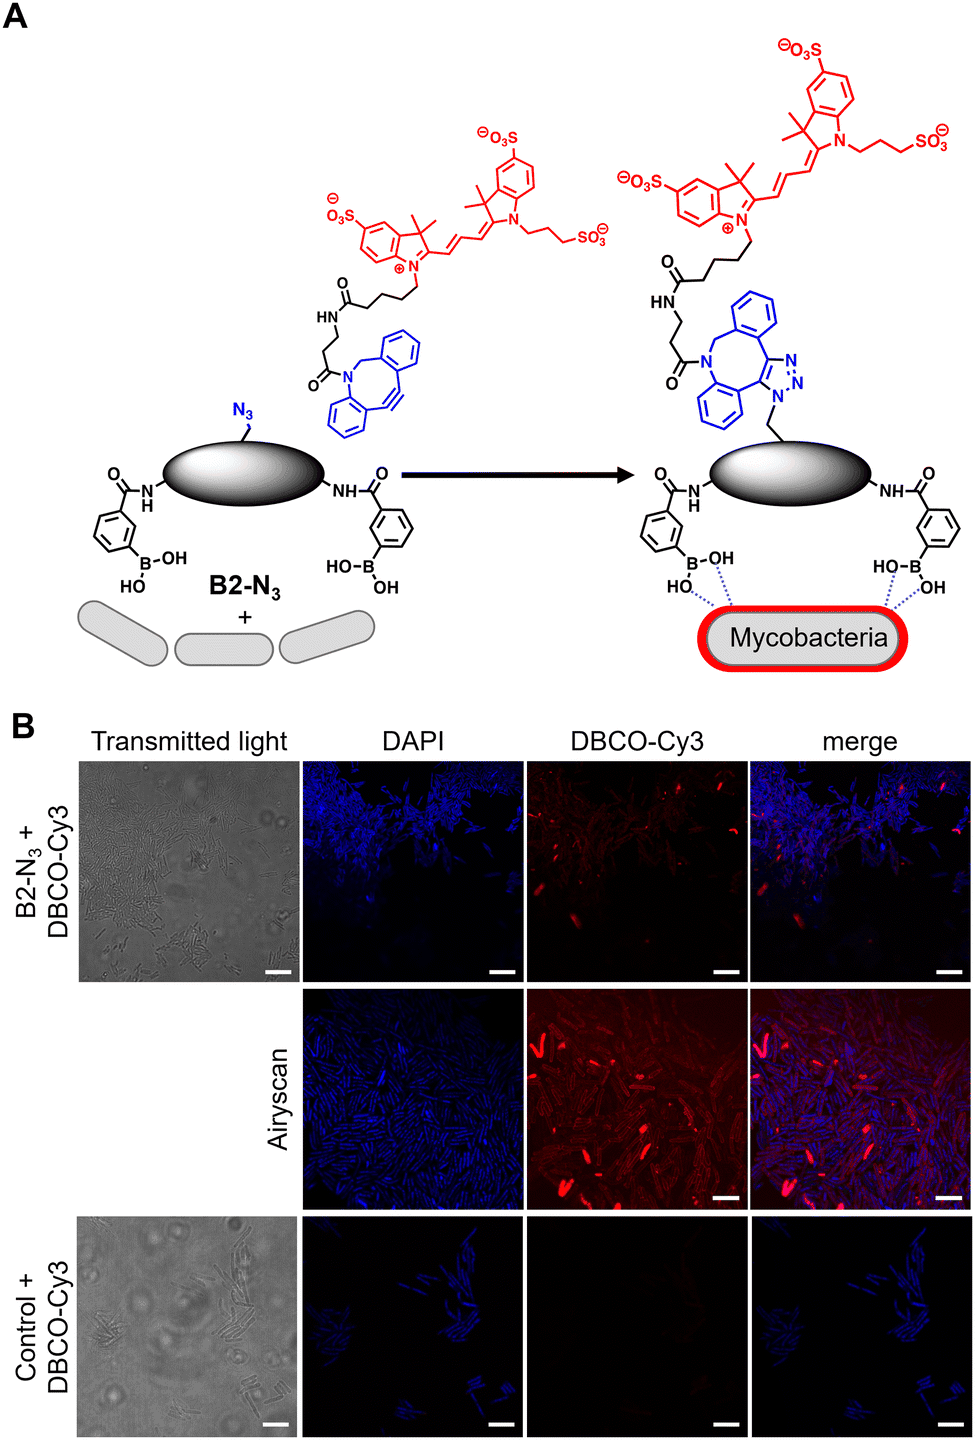 (A) Strategy for ‘click’-capture of B2-N3 with DBCO-Cy3 (B) fluorescence microscopy of B2-N3 labelled Mycobacterium smegmatis with DBCO-Cy3 via SPAAC. Scale bars are 5 μm. Source: <b>Imaging of antitubercular dimeric boronic acids at the mycobacterial cell surface by click-probe capture</b> by Collette S. Guy, Ruben M. F. Tomás, Qiao Tang, Matthew I. Gibson and Elizabeth Fullam. <em>Chem. Commun.</em>, Aug. 2022.